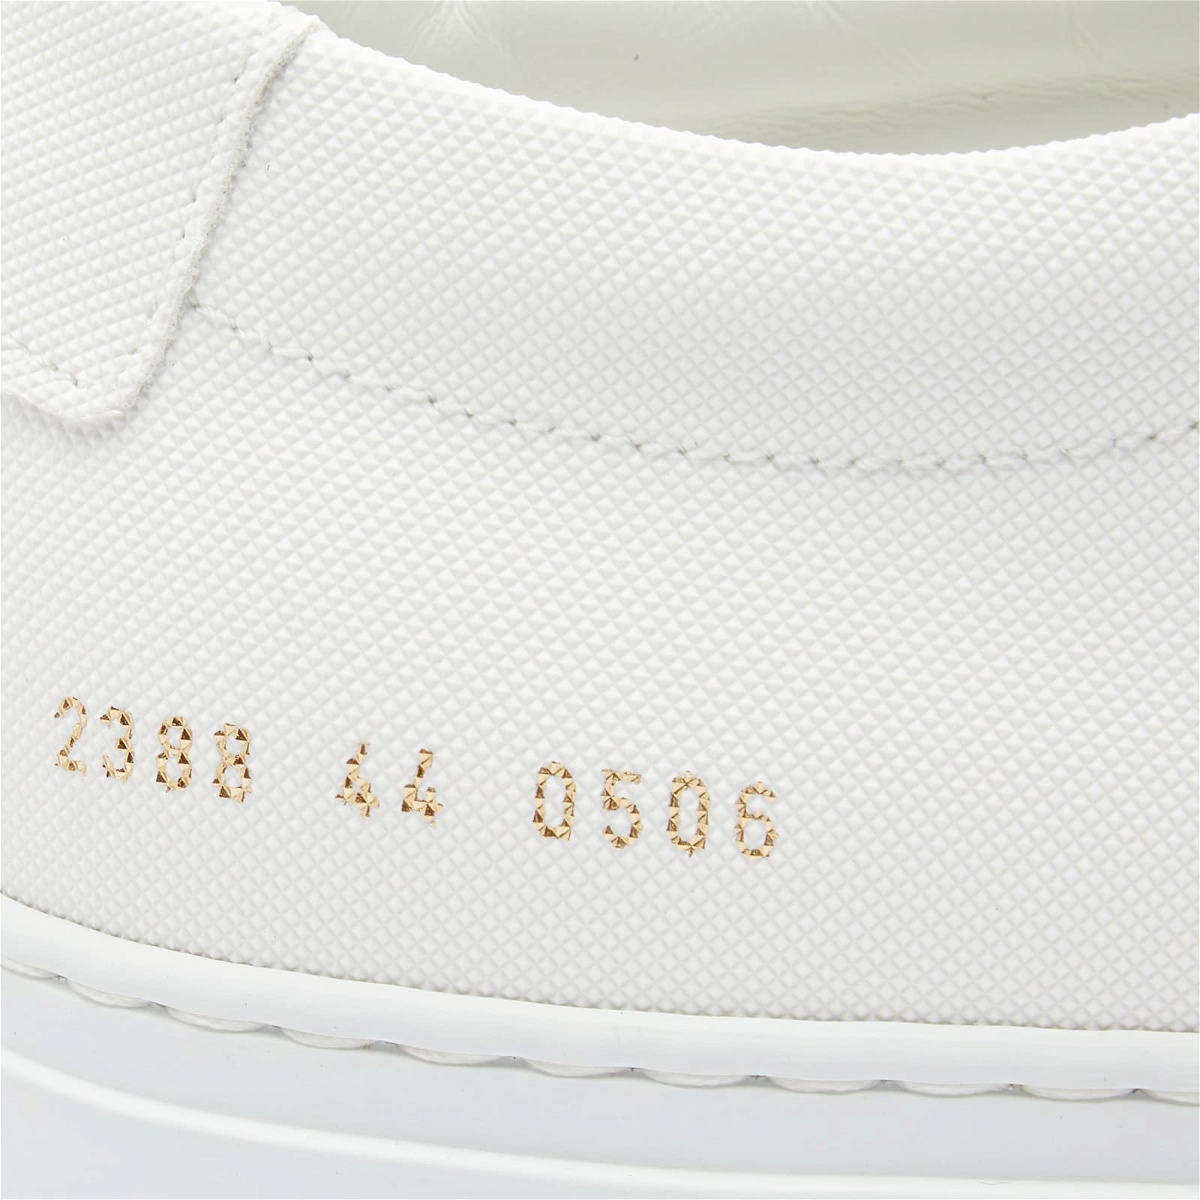 Common Projects Men's Achilles Tech Low Sneakers in White